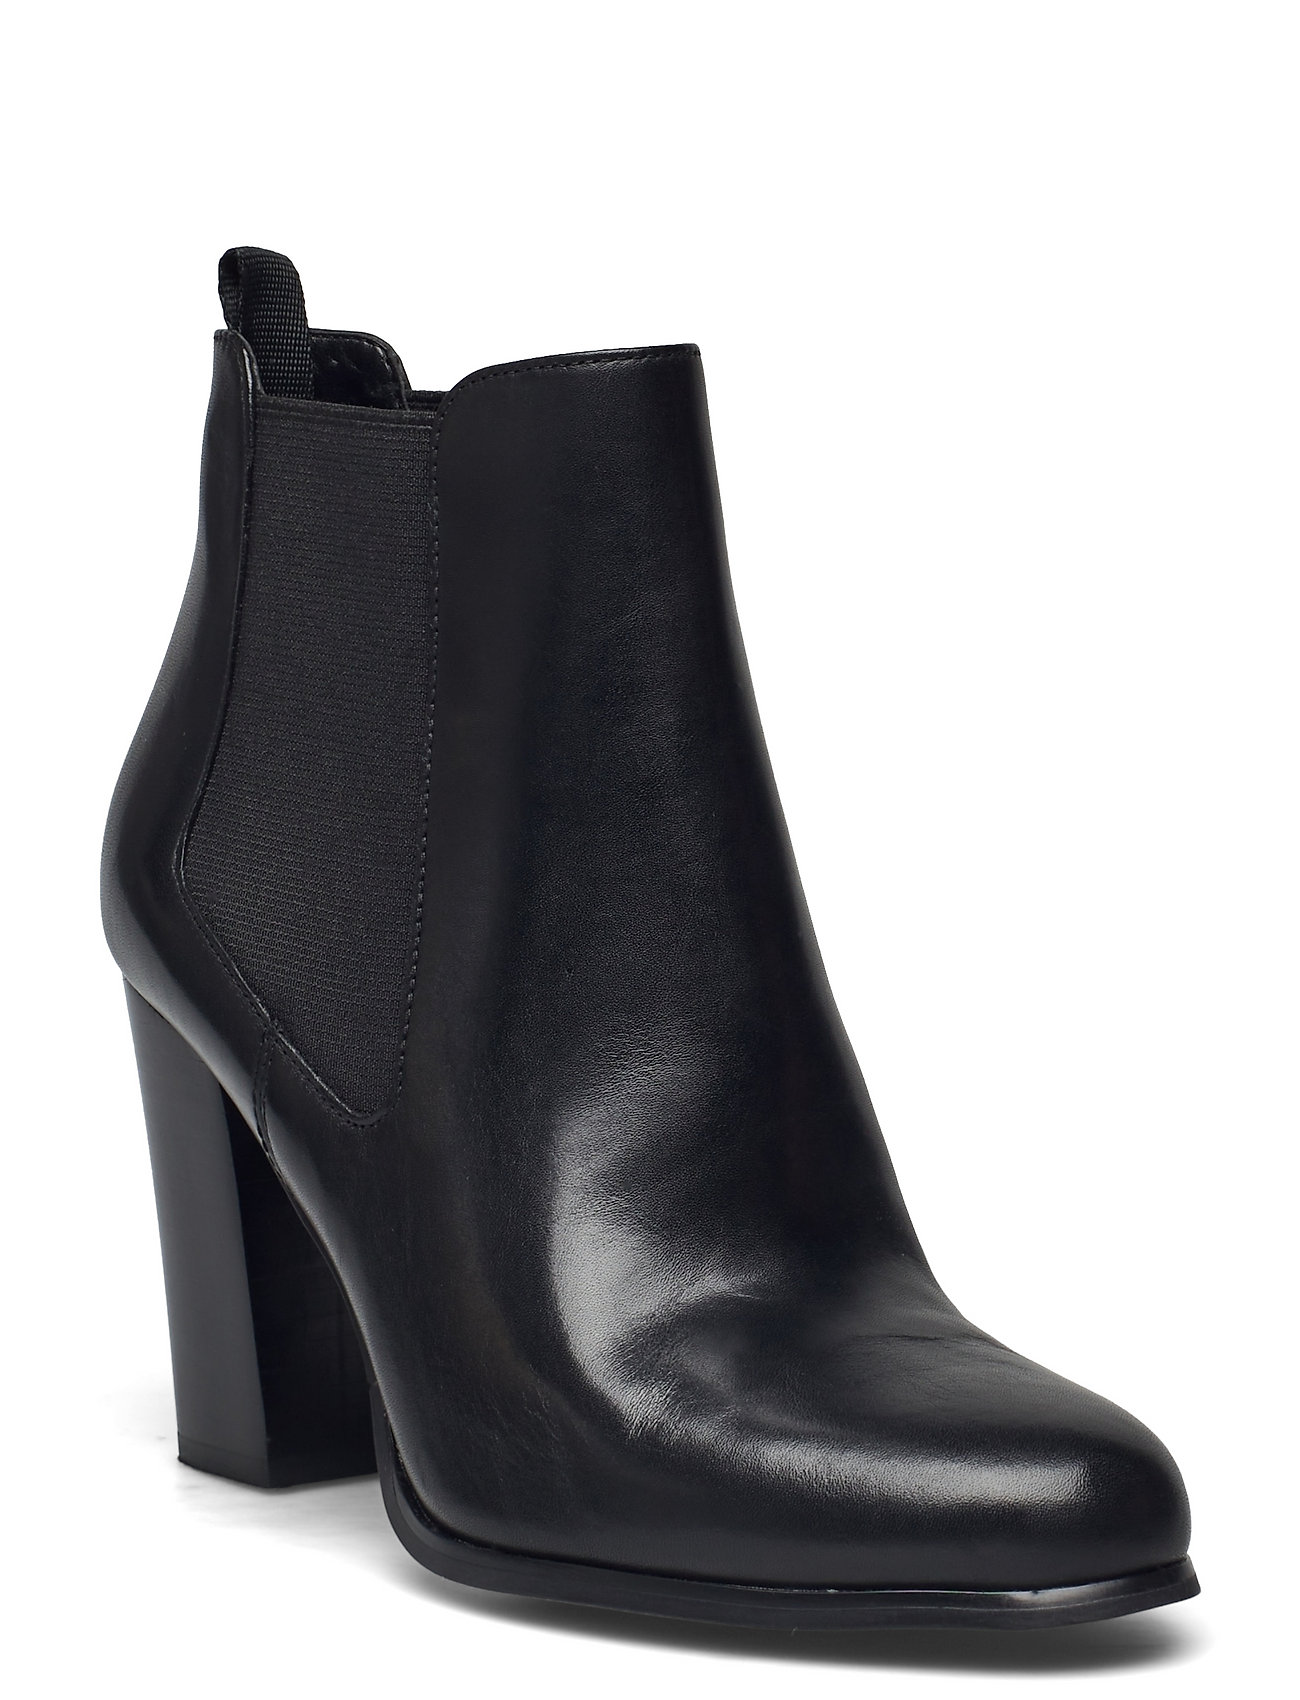 Lottie Bootie Shoes Boots Ankle Boots Ankle Boot - Heel Musta Michael Kors